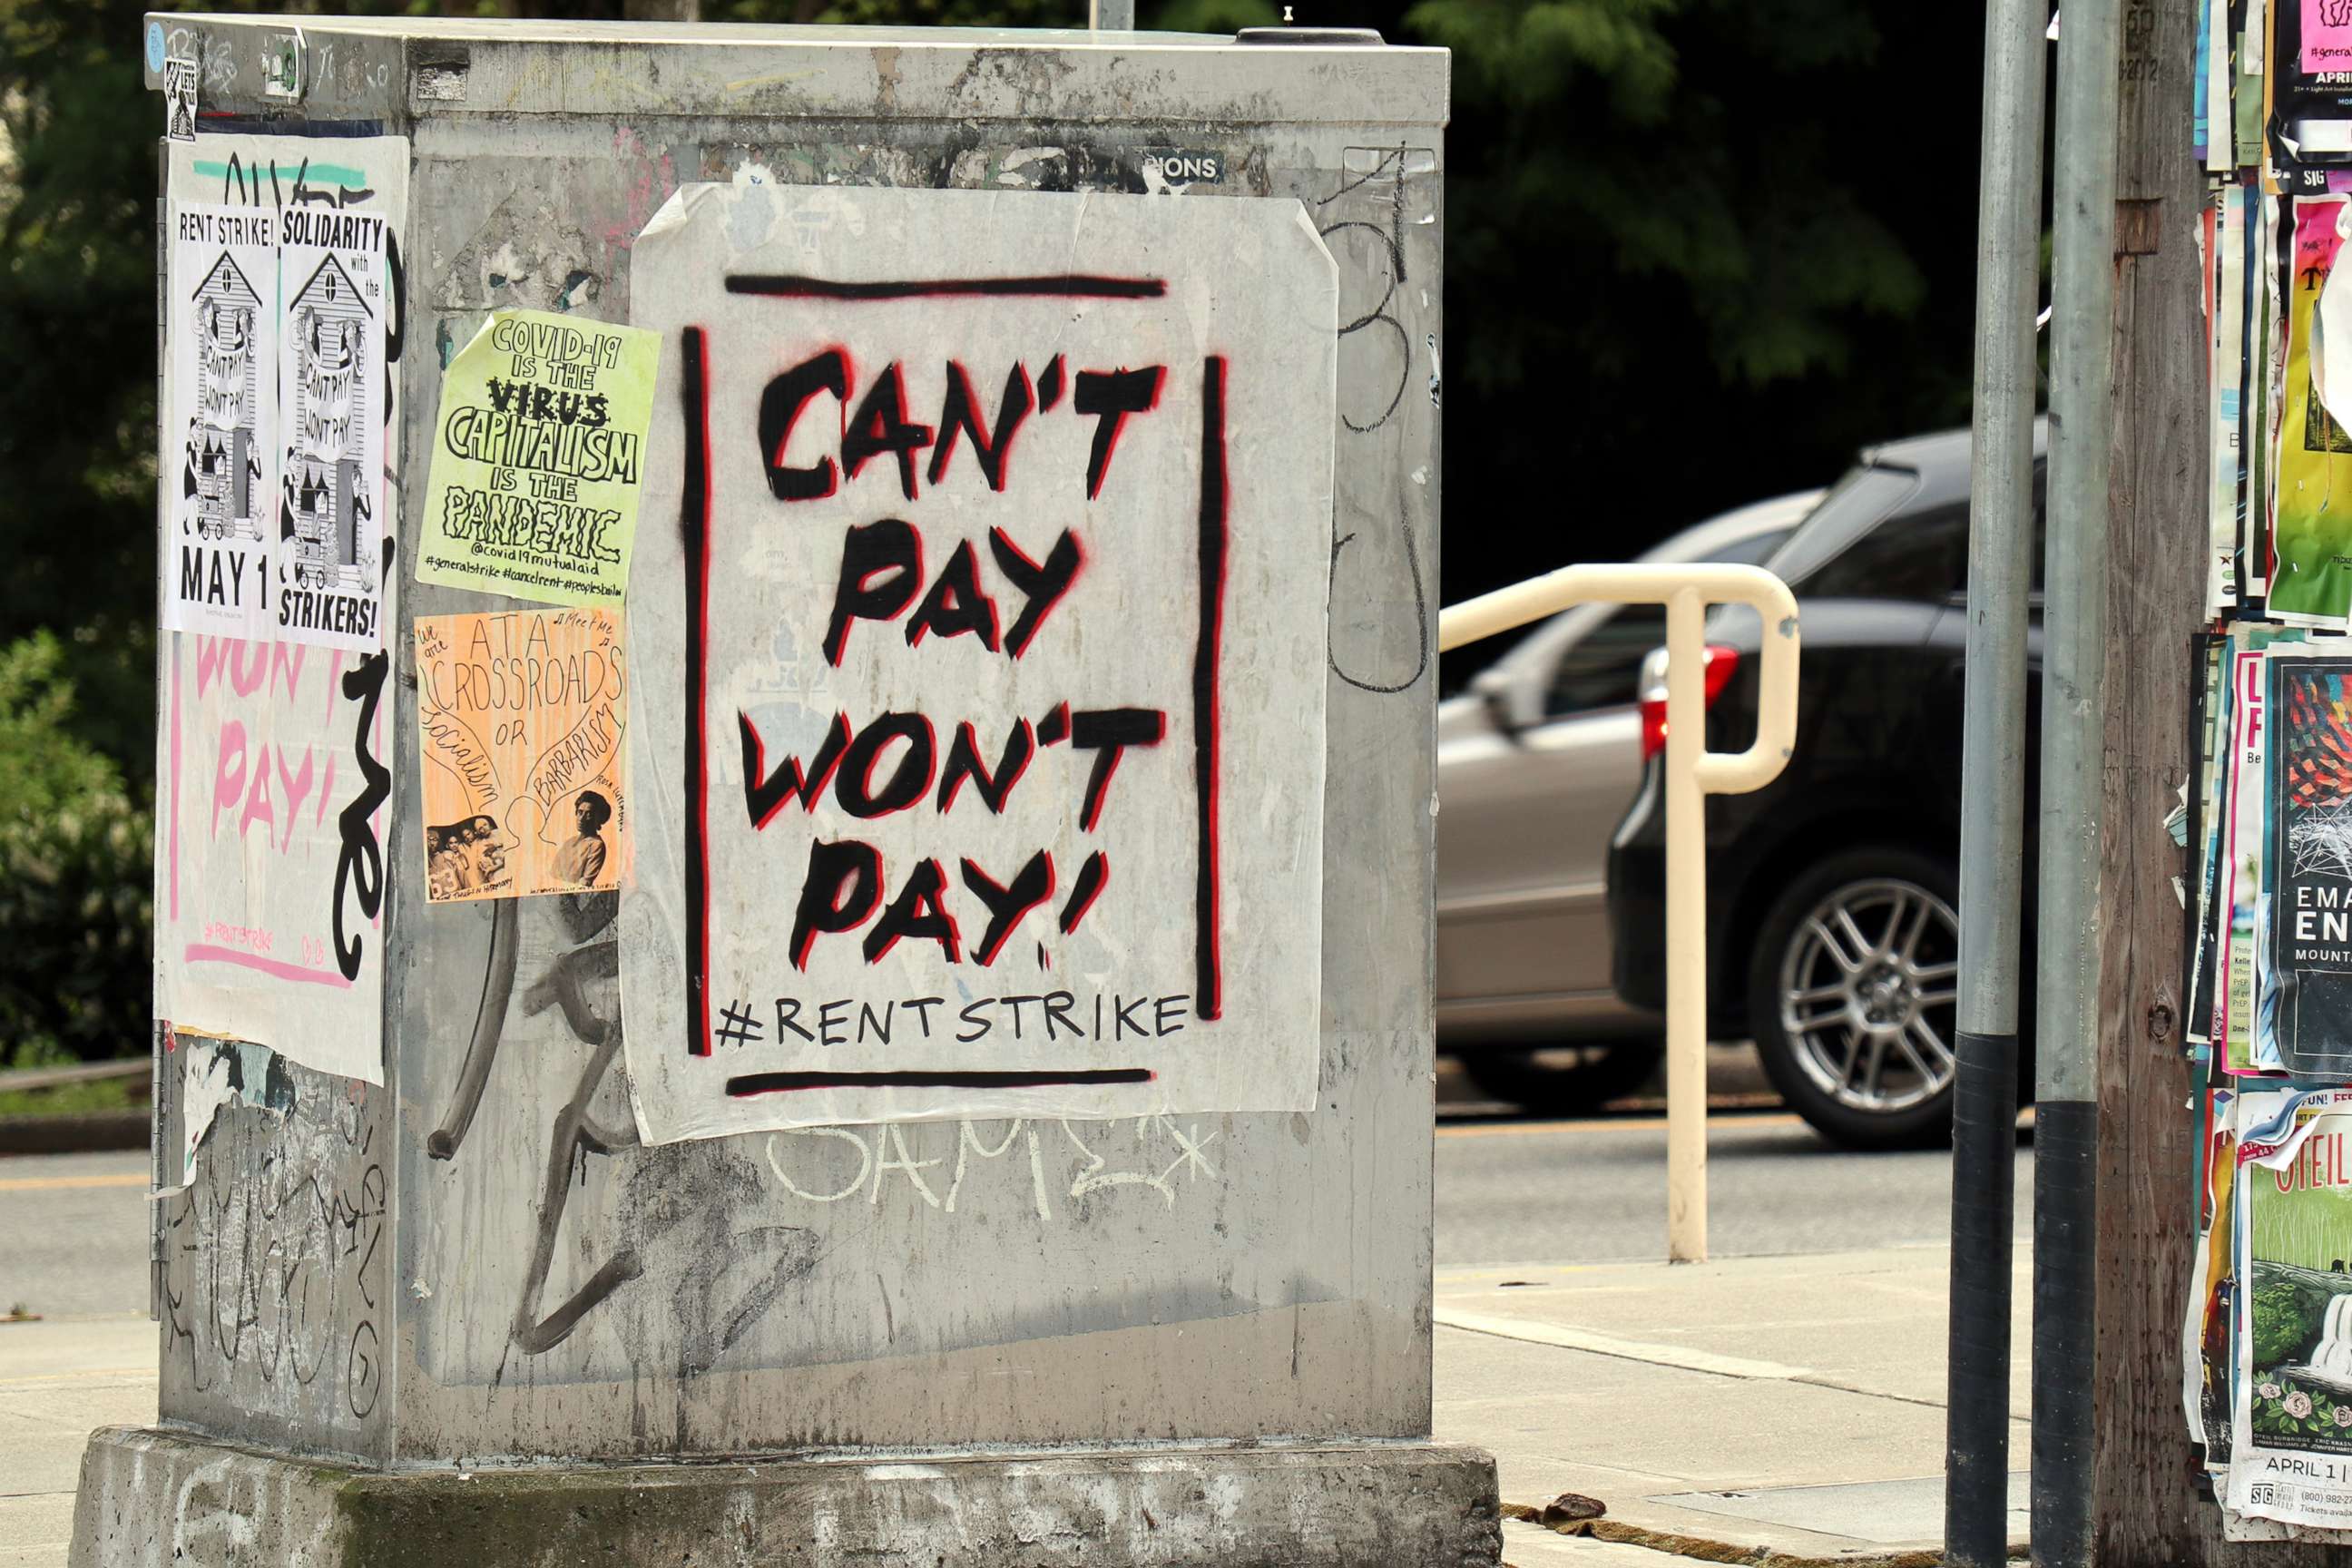 PHOTO: A utility box in Seattle's Capitol Hill neighborhood is shown covered in graffiti and posters calling for a rent strike, on May 1, 2020.